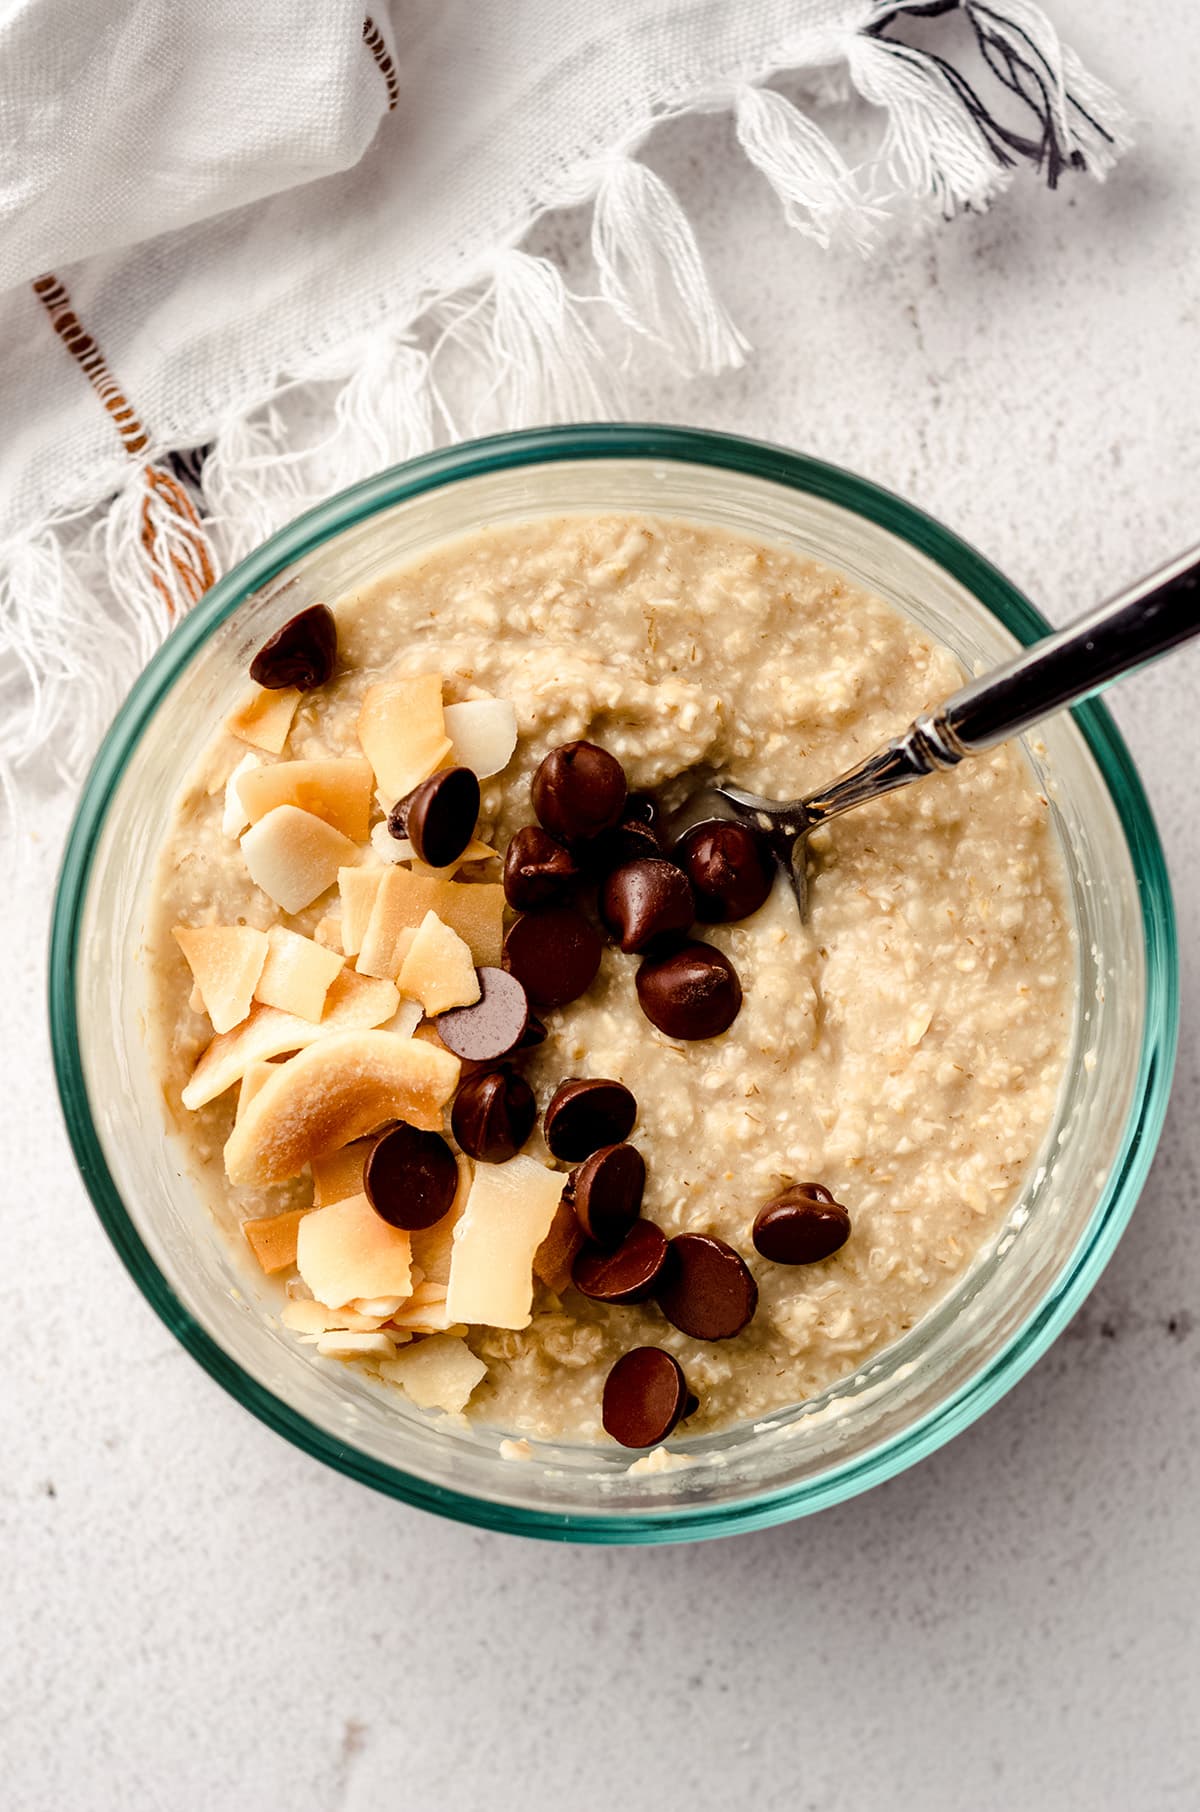 A bowl of oatmeal with toppings included.